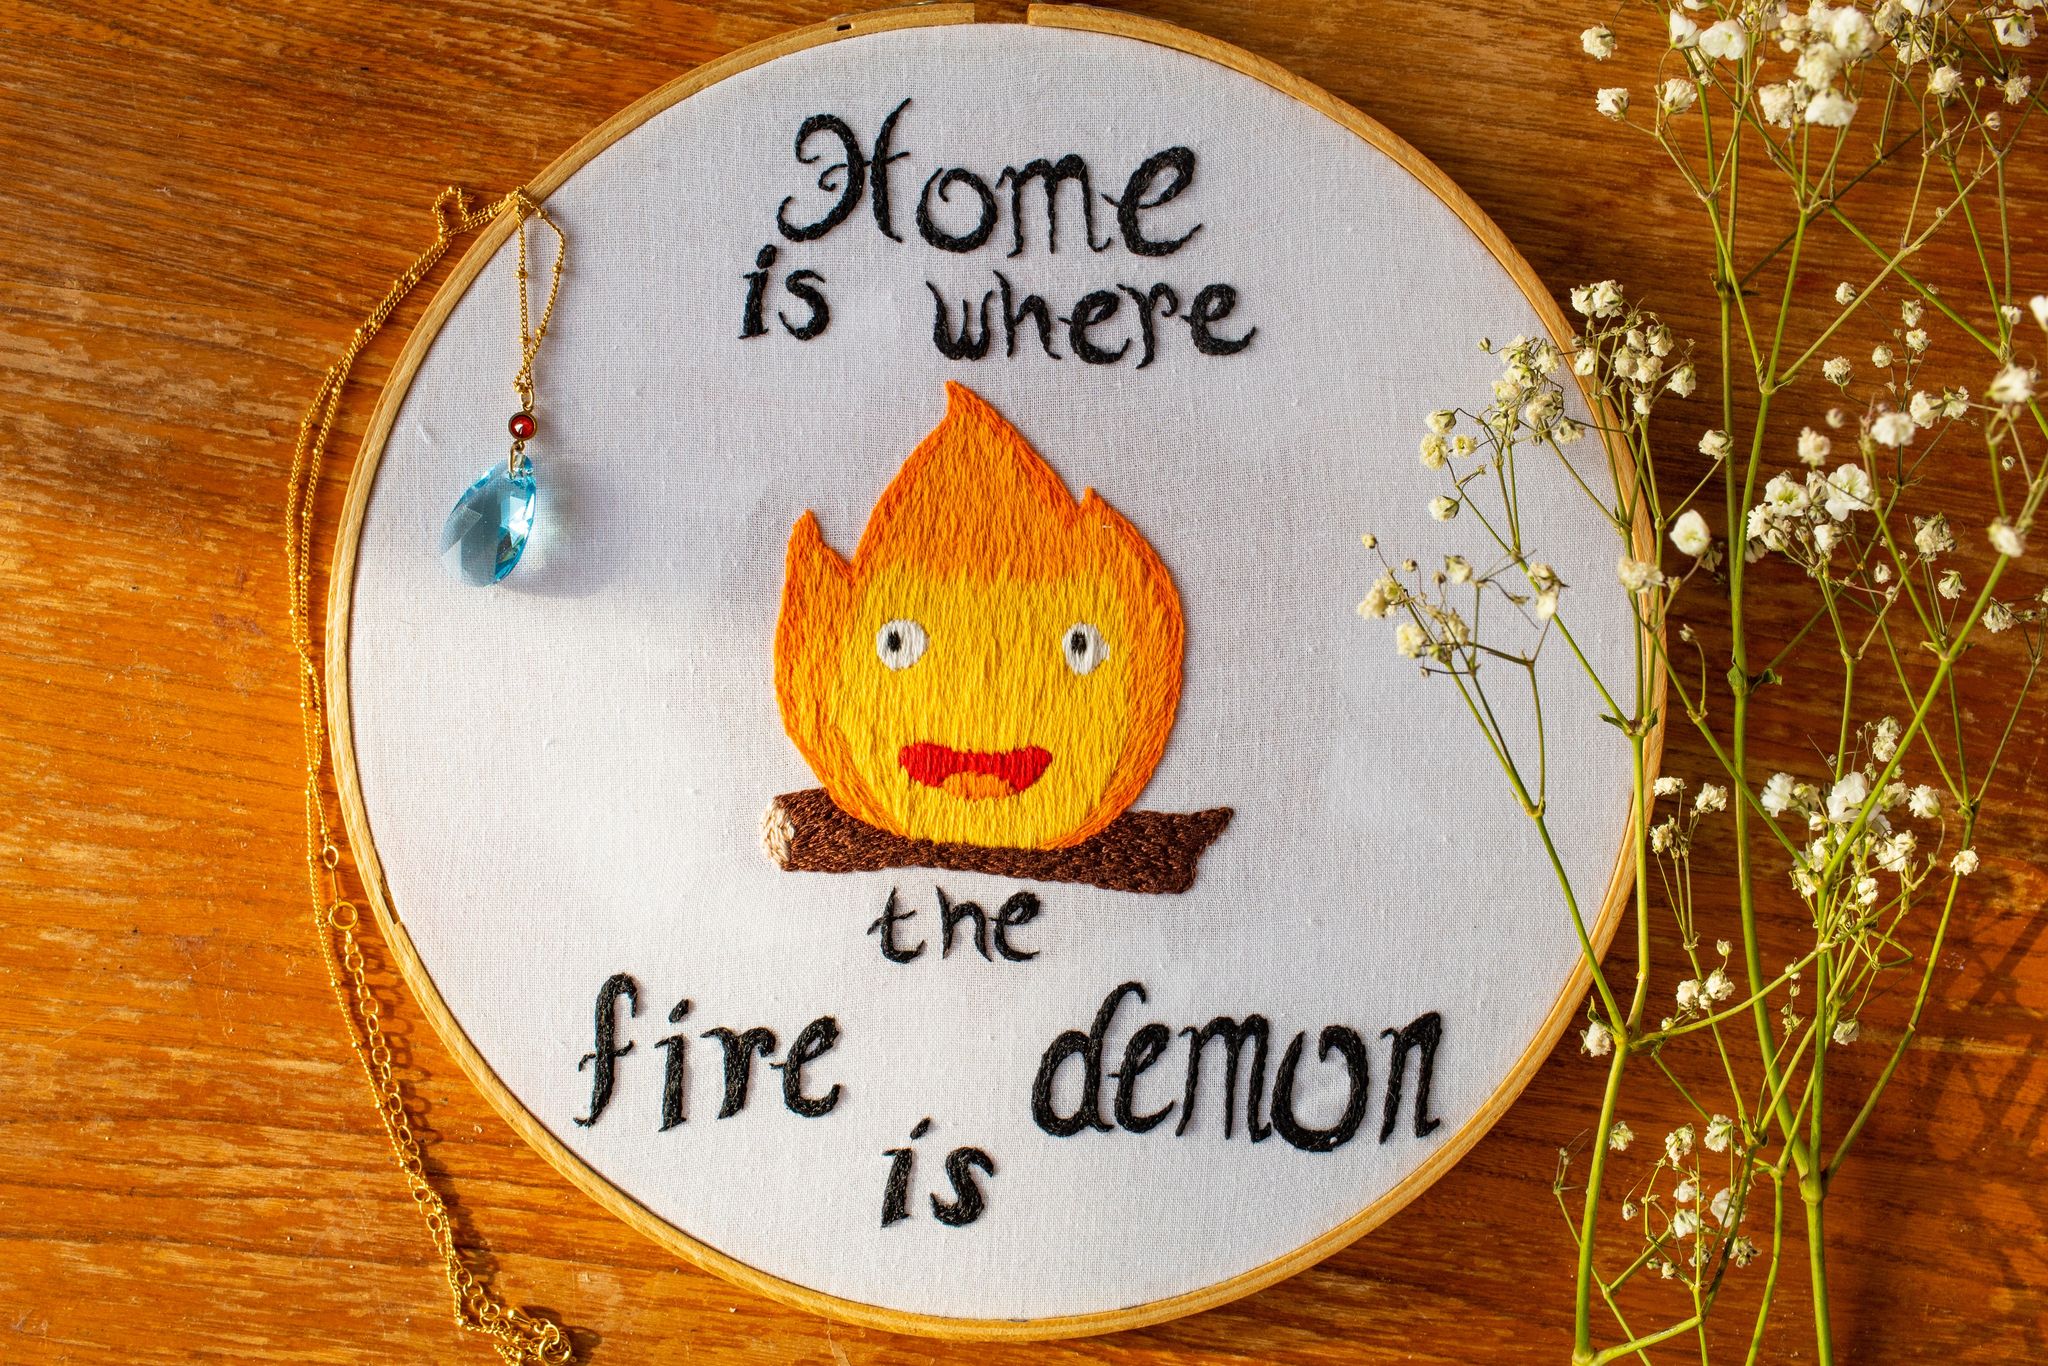 Product image of Calcifer embroider on wooden background surrounded by a blue pendant on a gold chain and baby's breath flowers